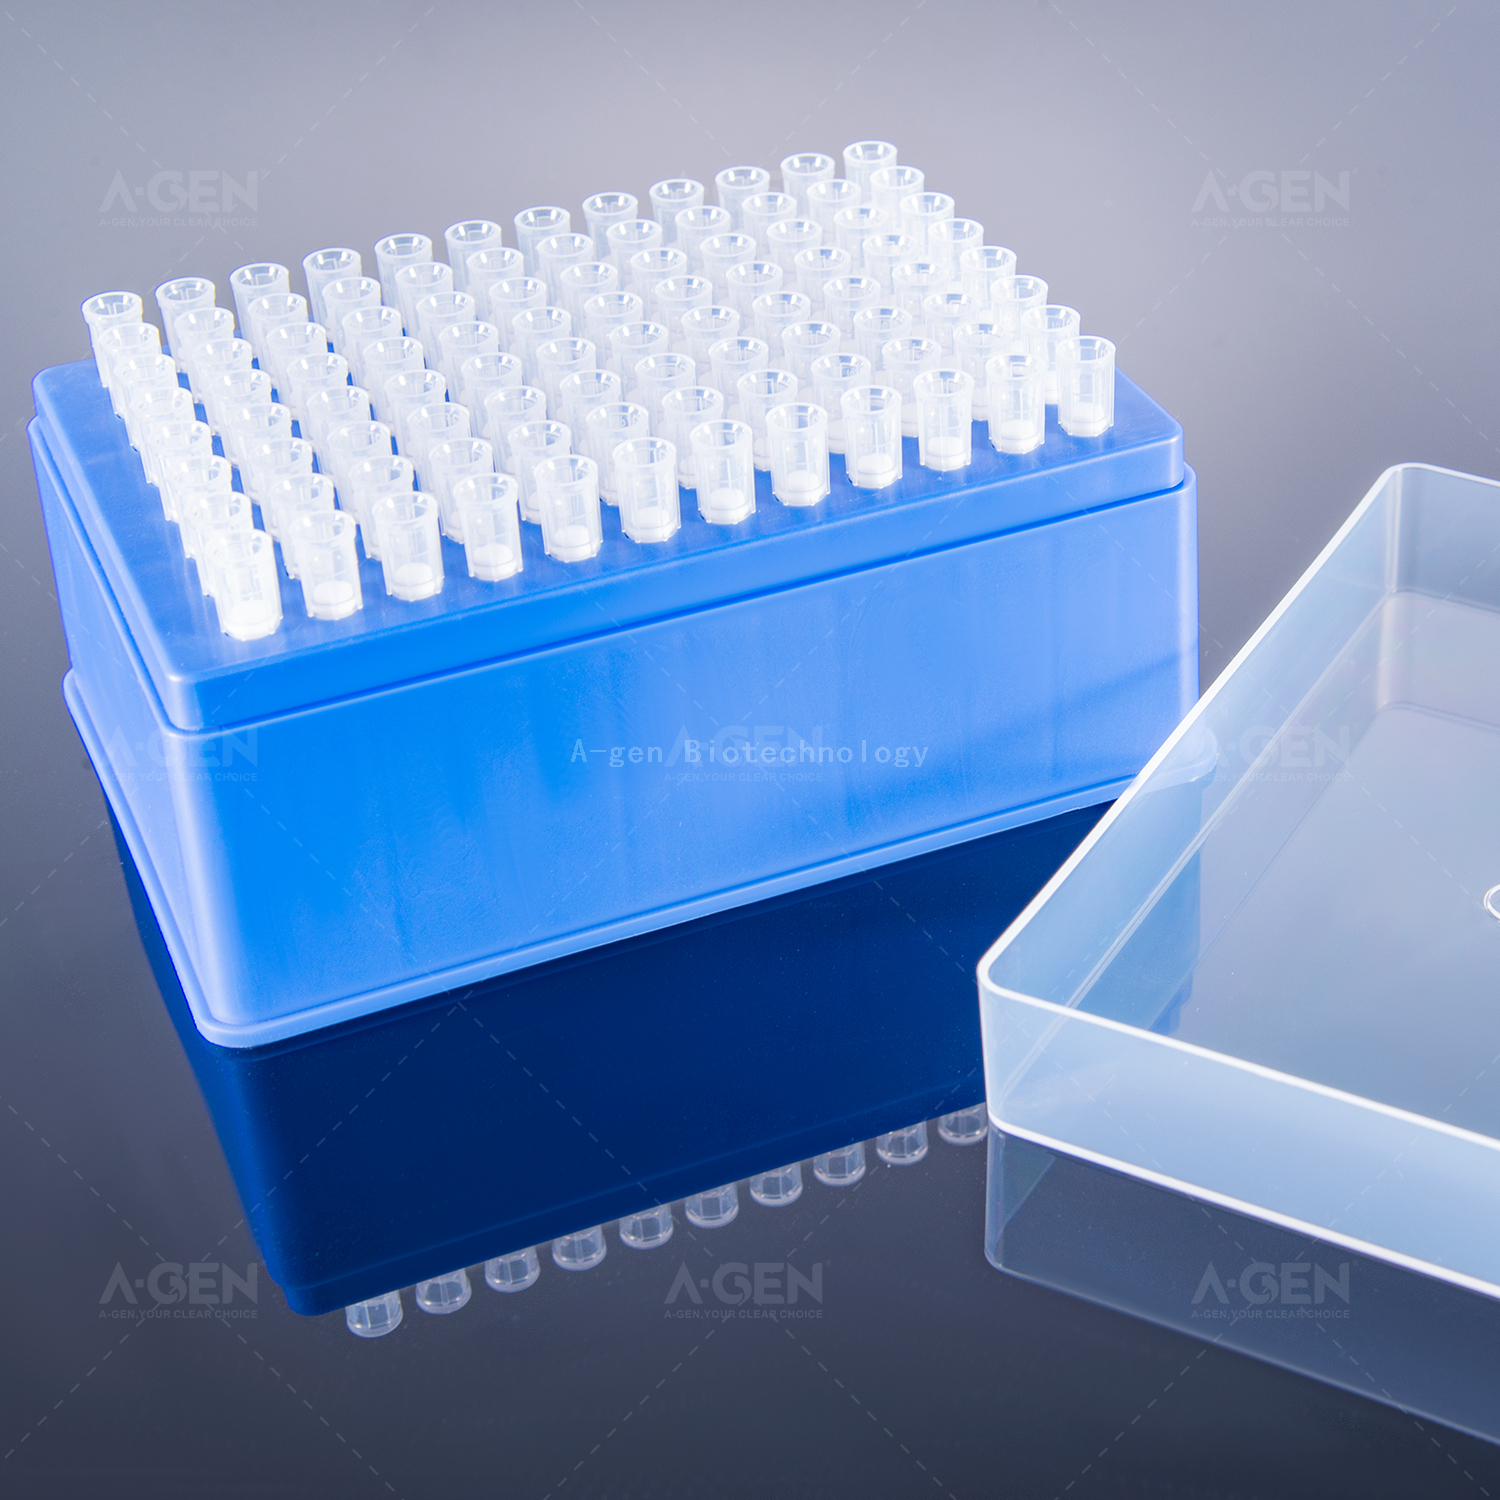 Nayo Tip 250μL Clear Robotic PP Pipette Tip (Racked,sterilized) for Liquid Transfer with Filter FXF-250-RSL Low Residual